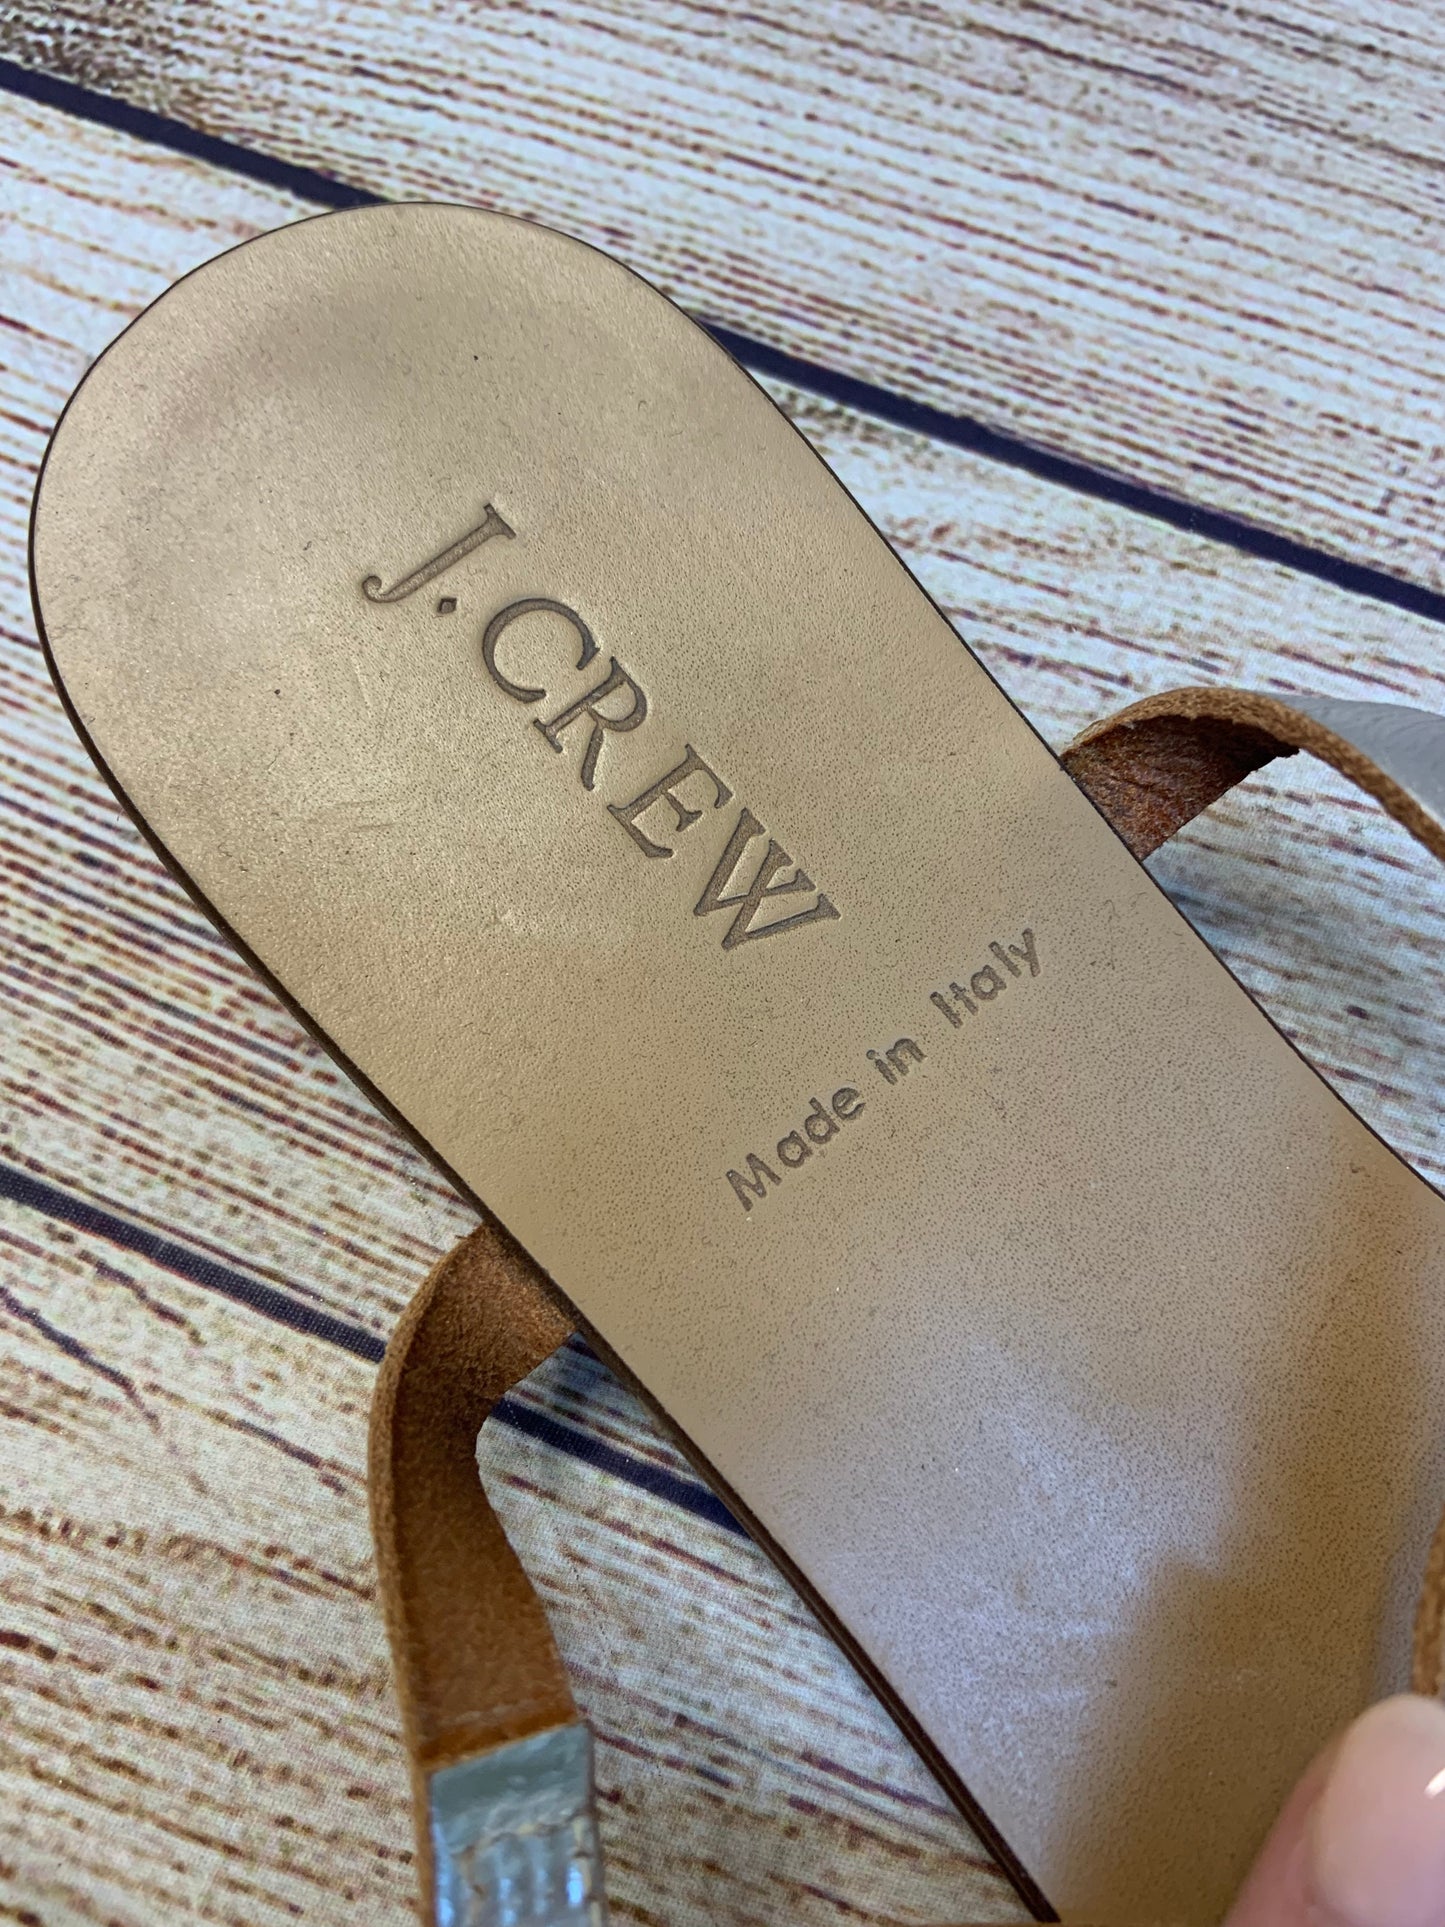 Sandals Flats By J Crew  Size: 8